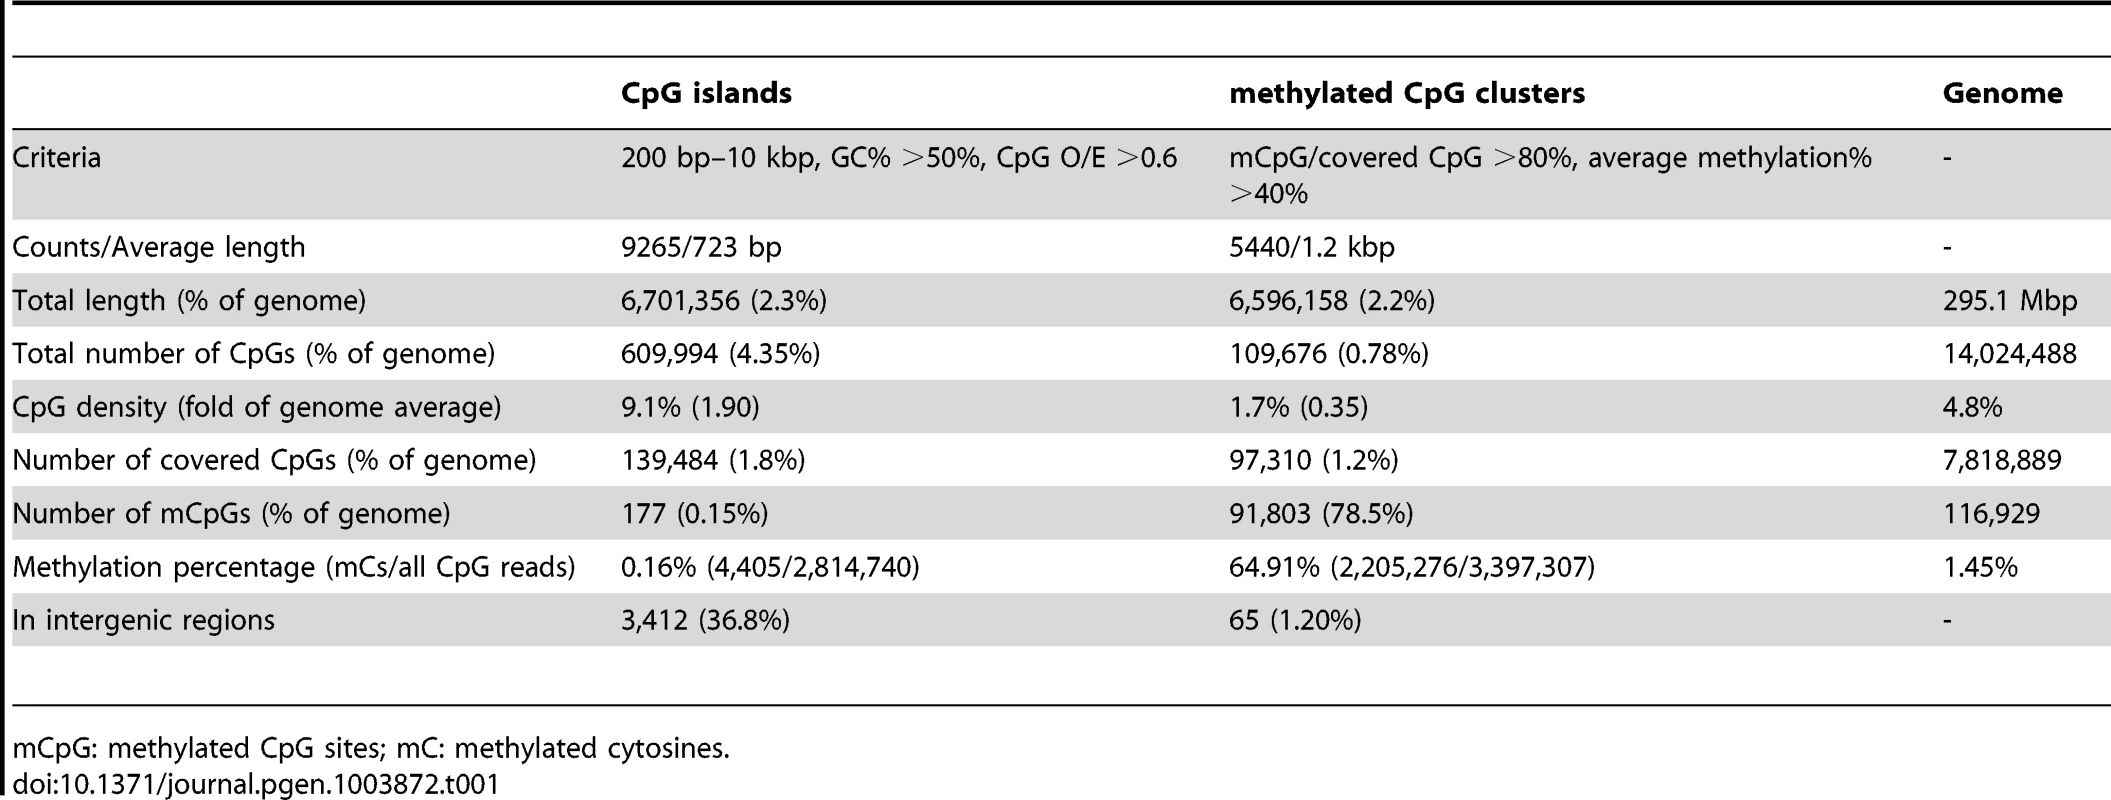 Summary of DNA methylation status for CpG islands and methylated CpG clusters.